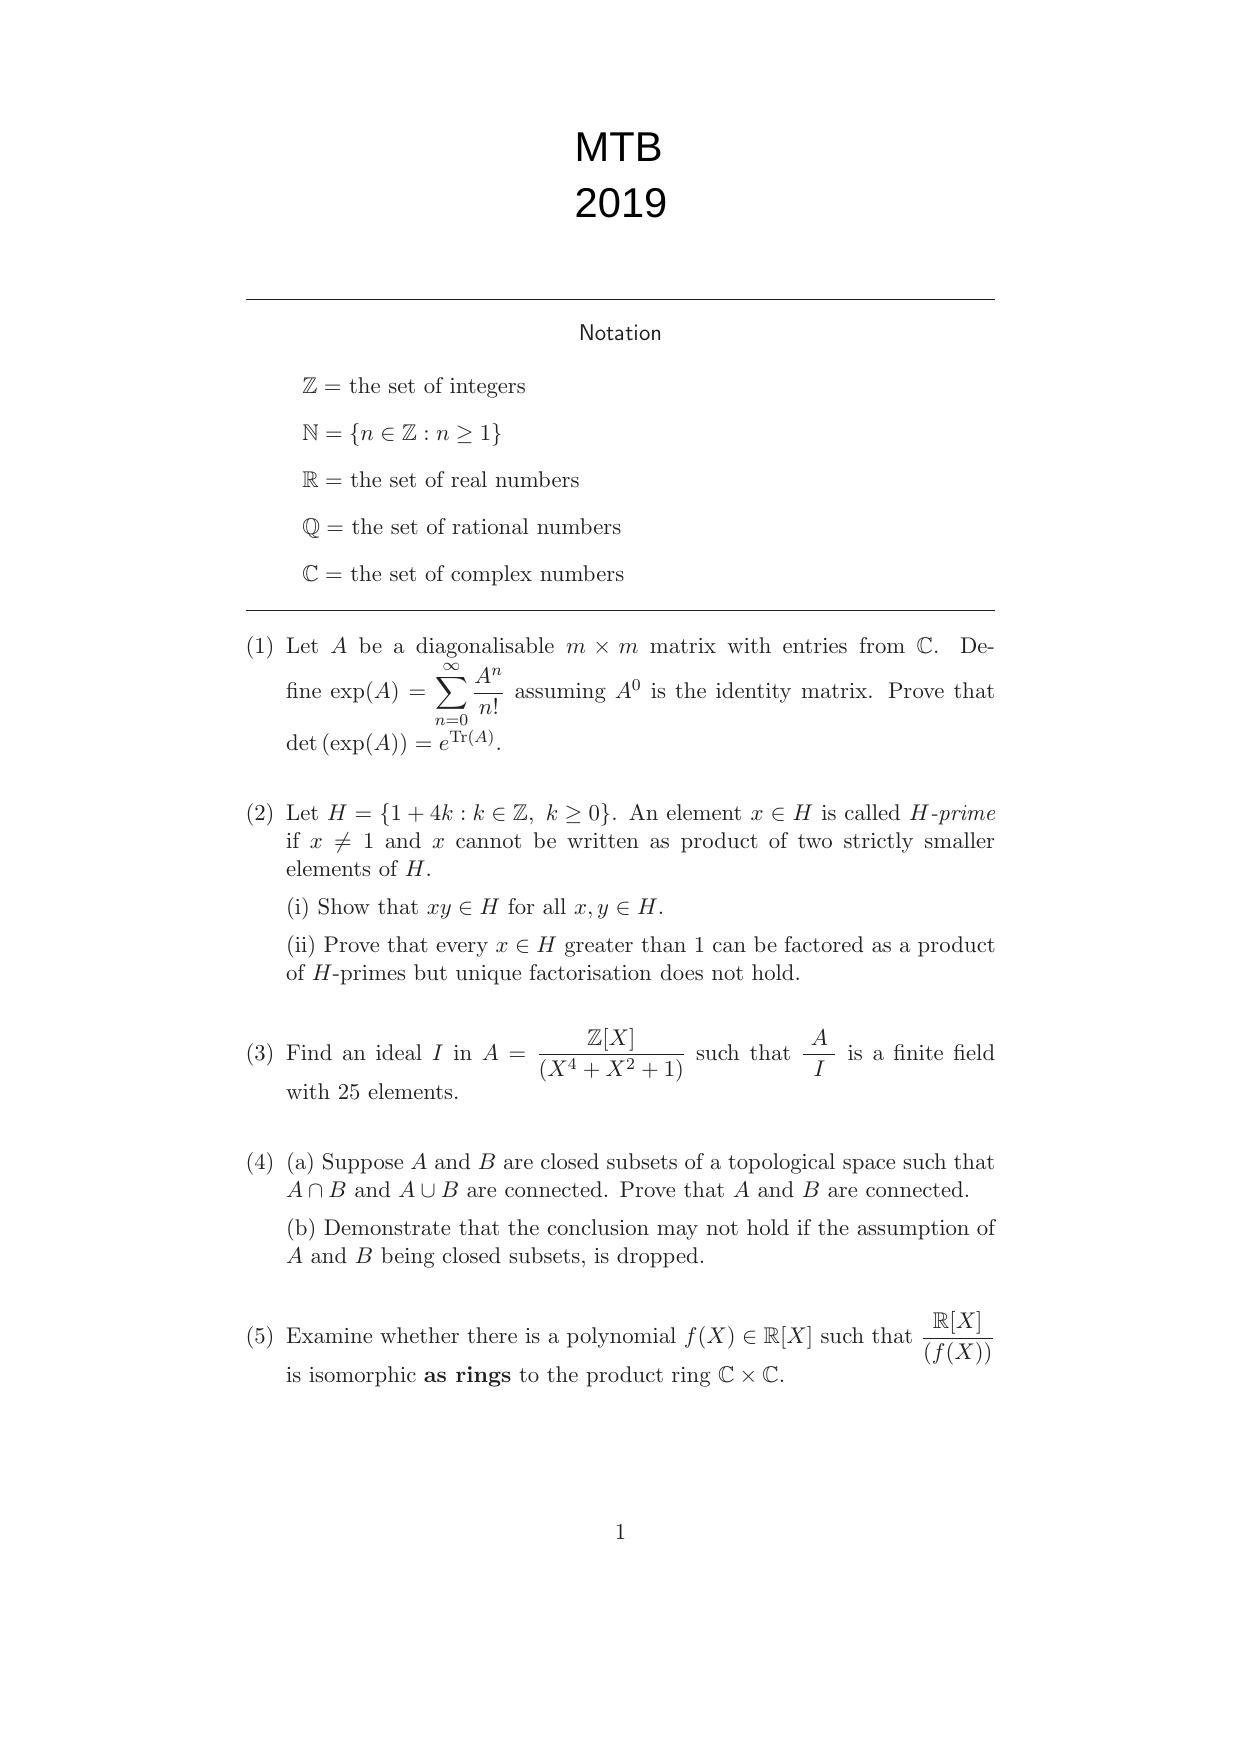 ISI Admission Test JRF in Mathematics MTB 2019 Sample Paper - Page 1